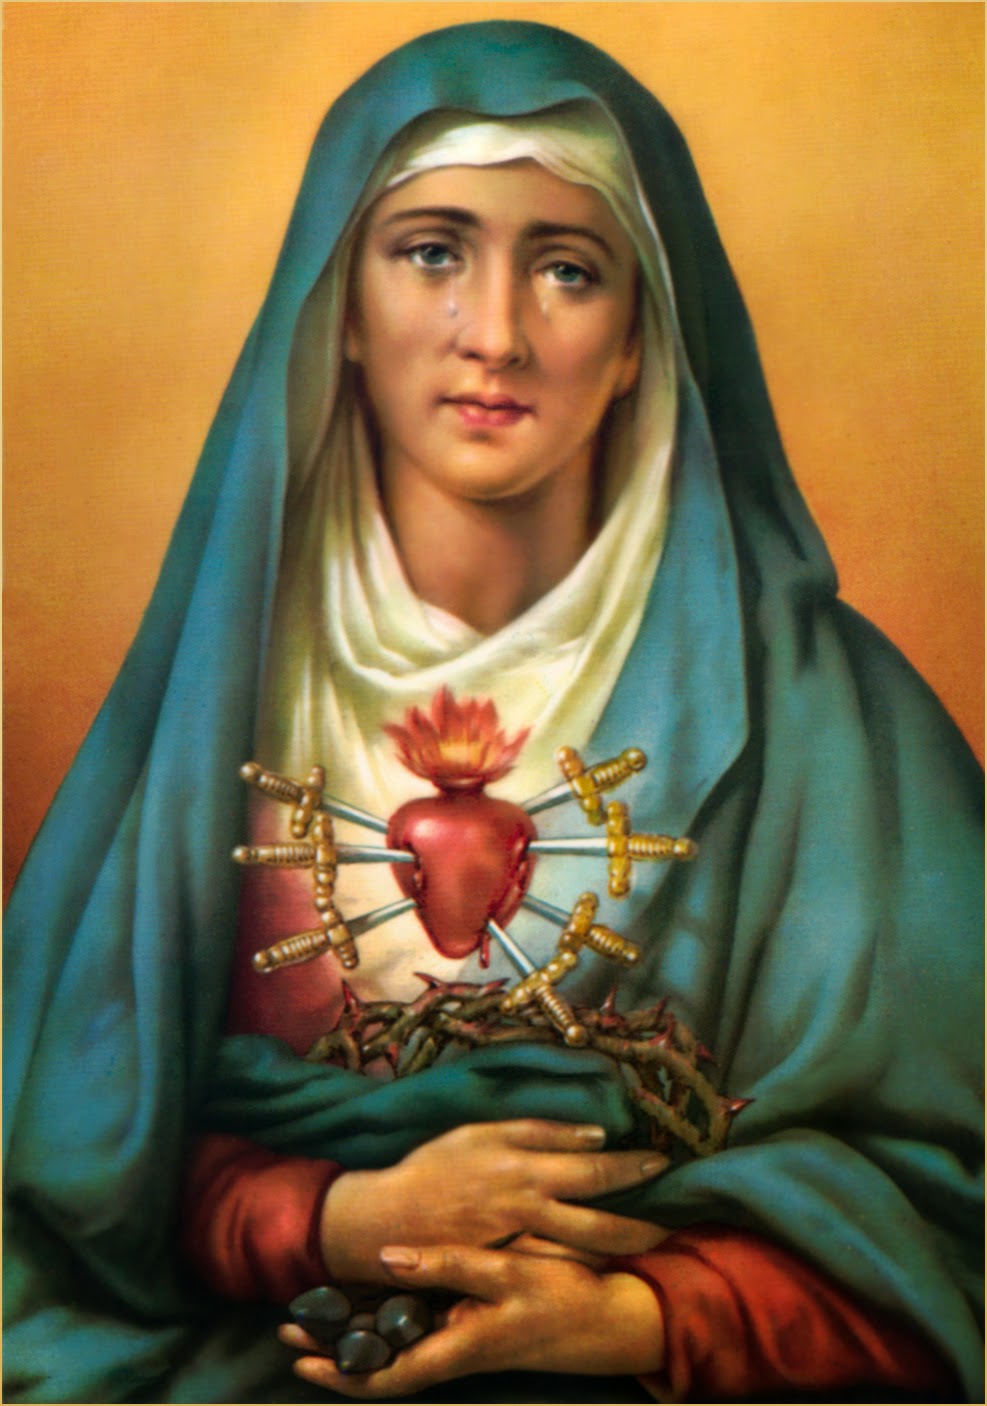 A Catholic Life Feast of our Lady of Sorrows in Lent